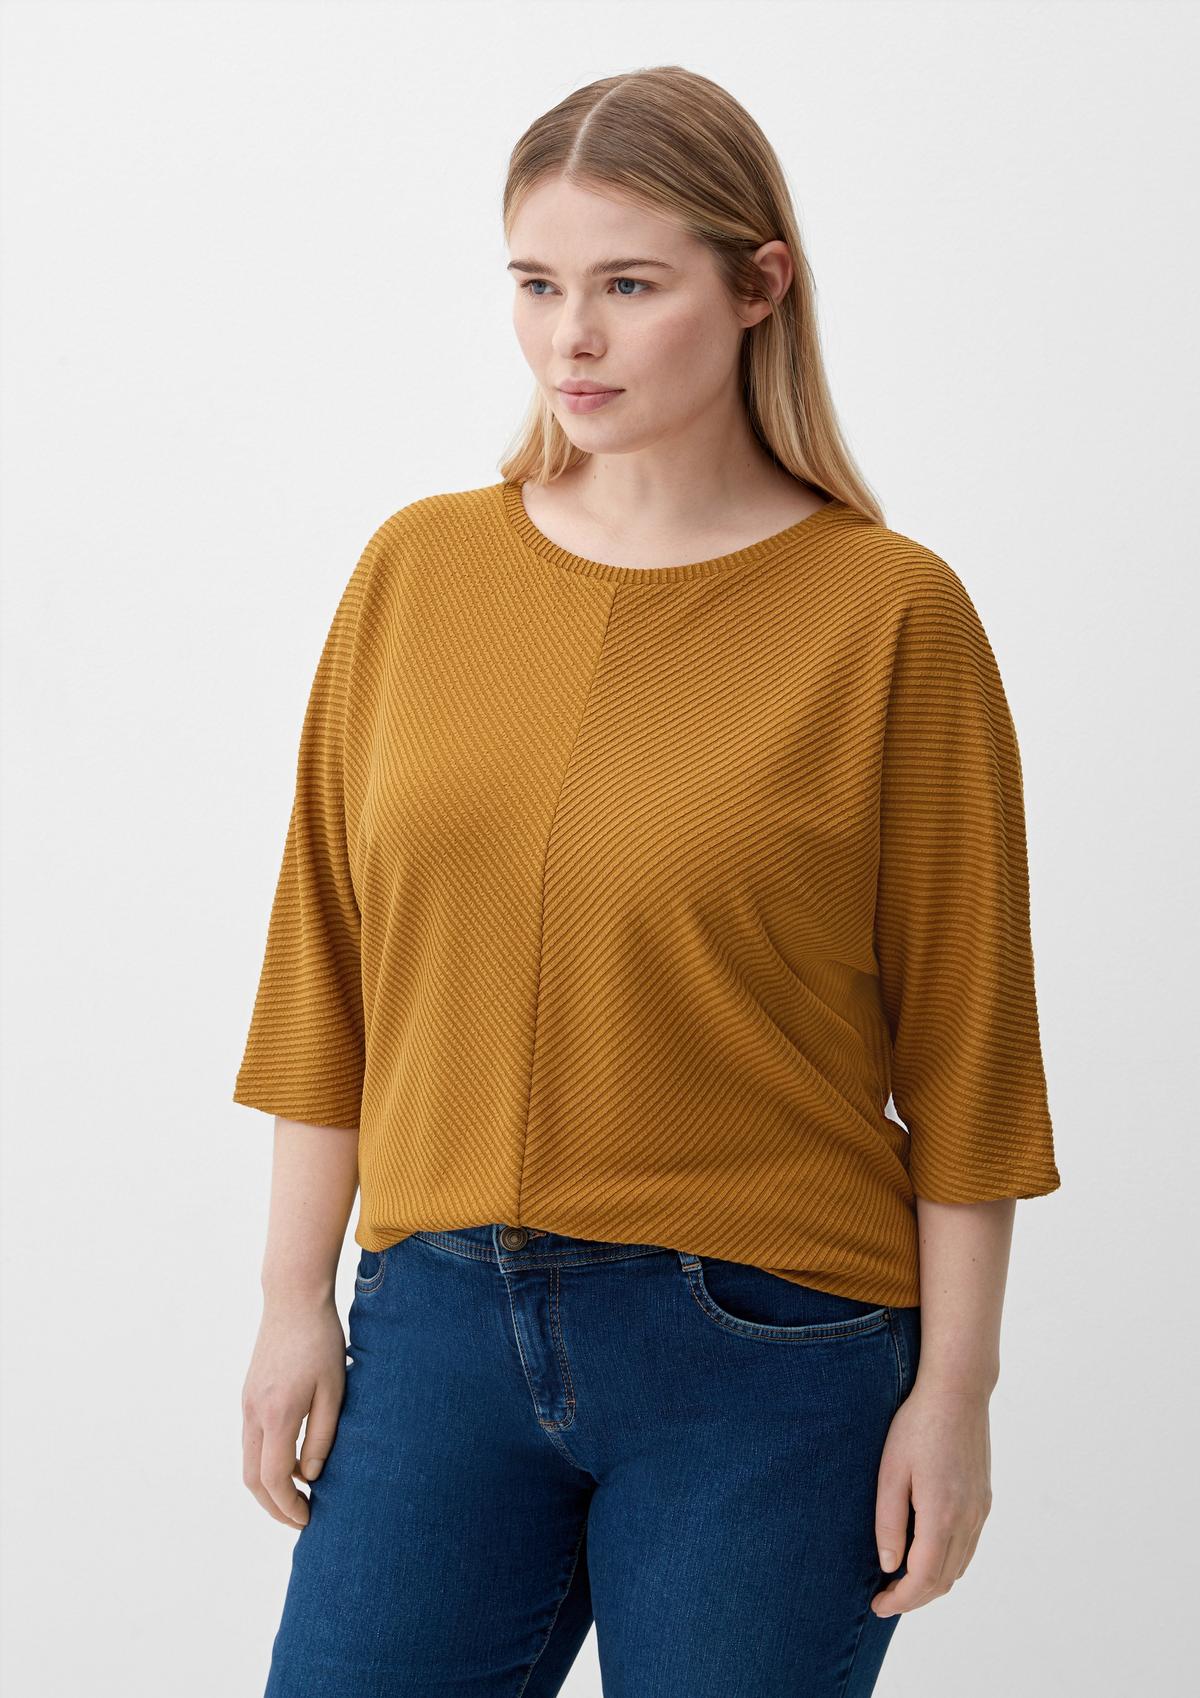 Top with batwing sleeves